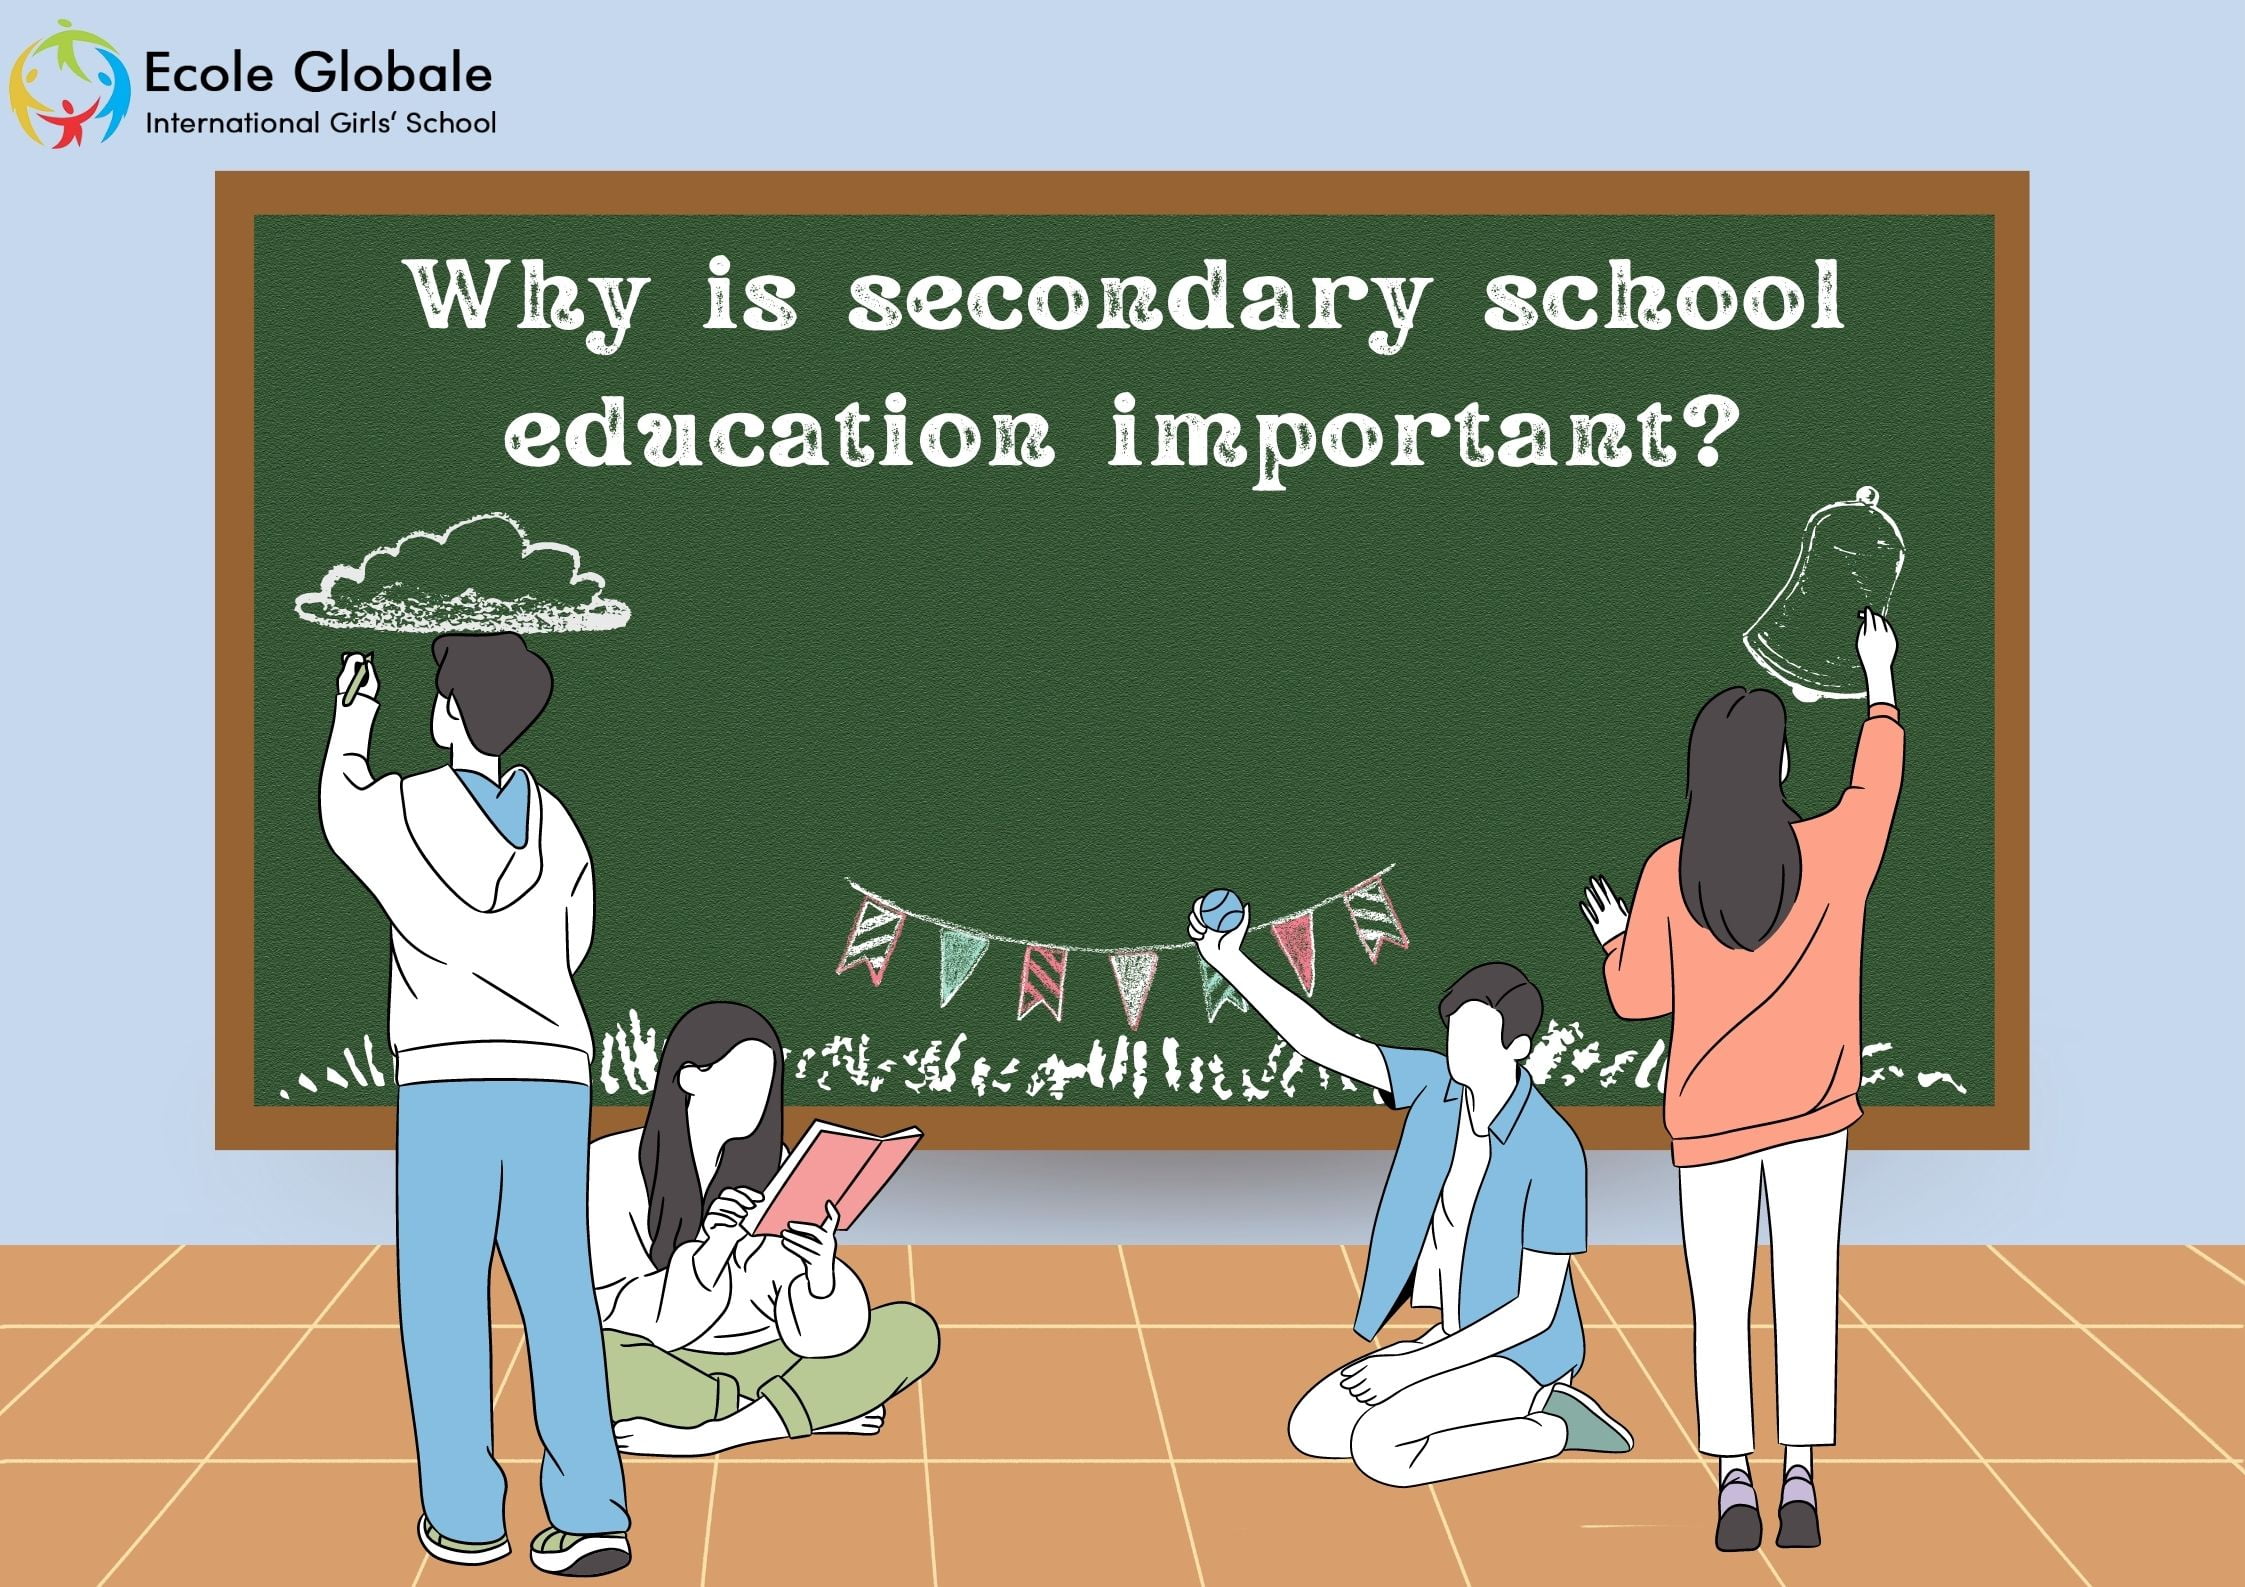 Why is secondary school education important?